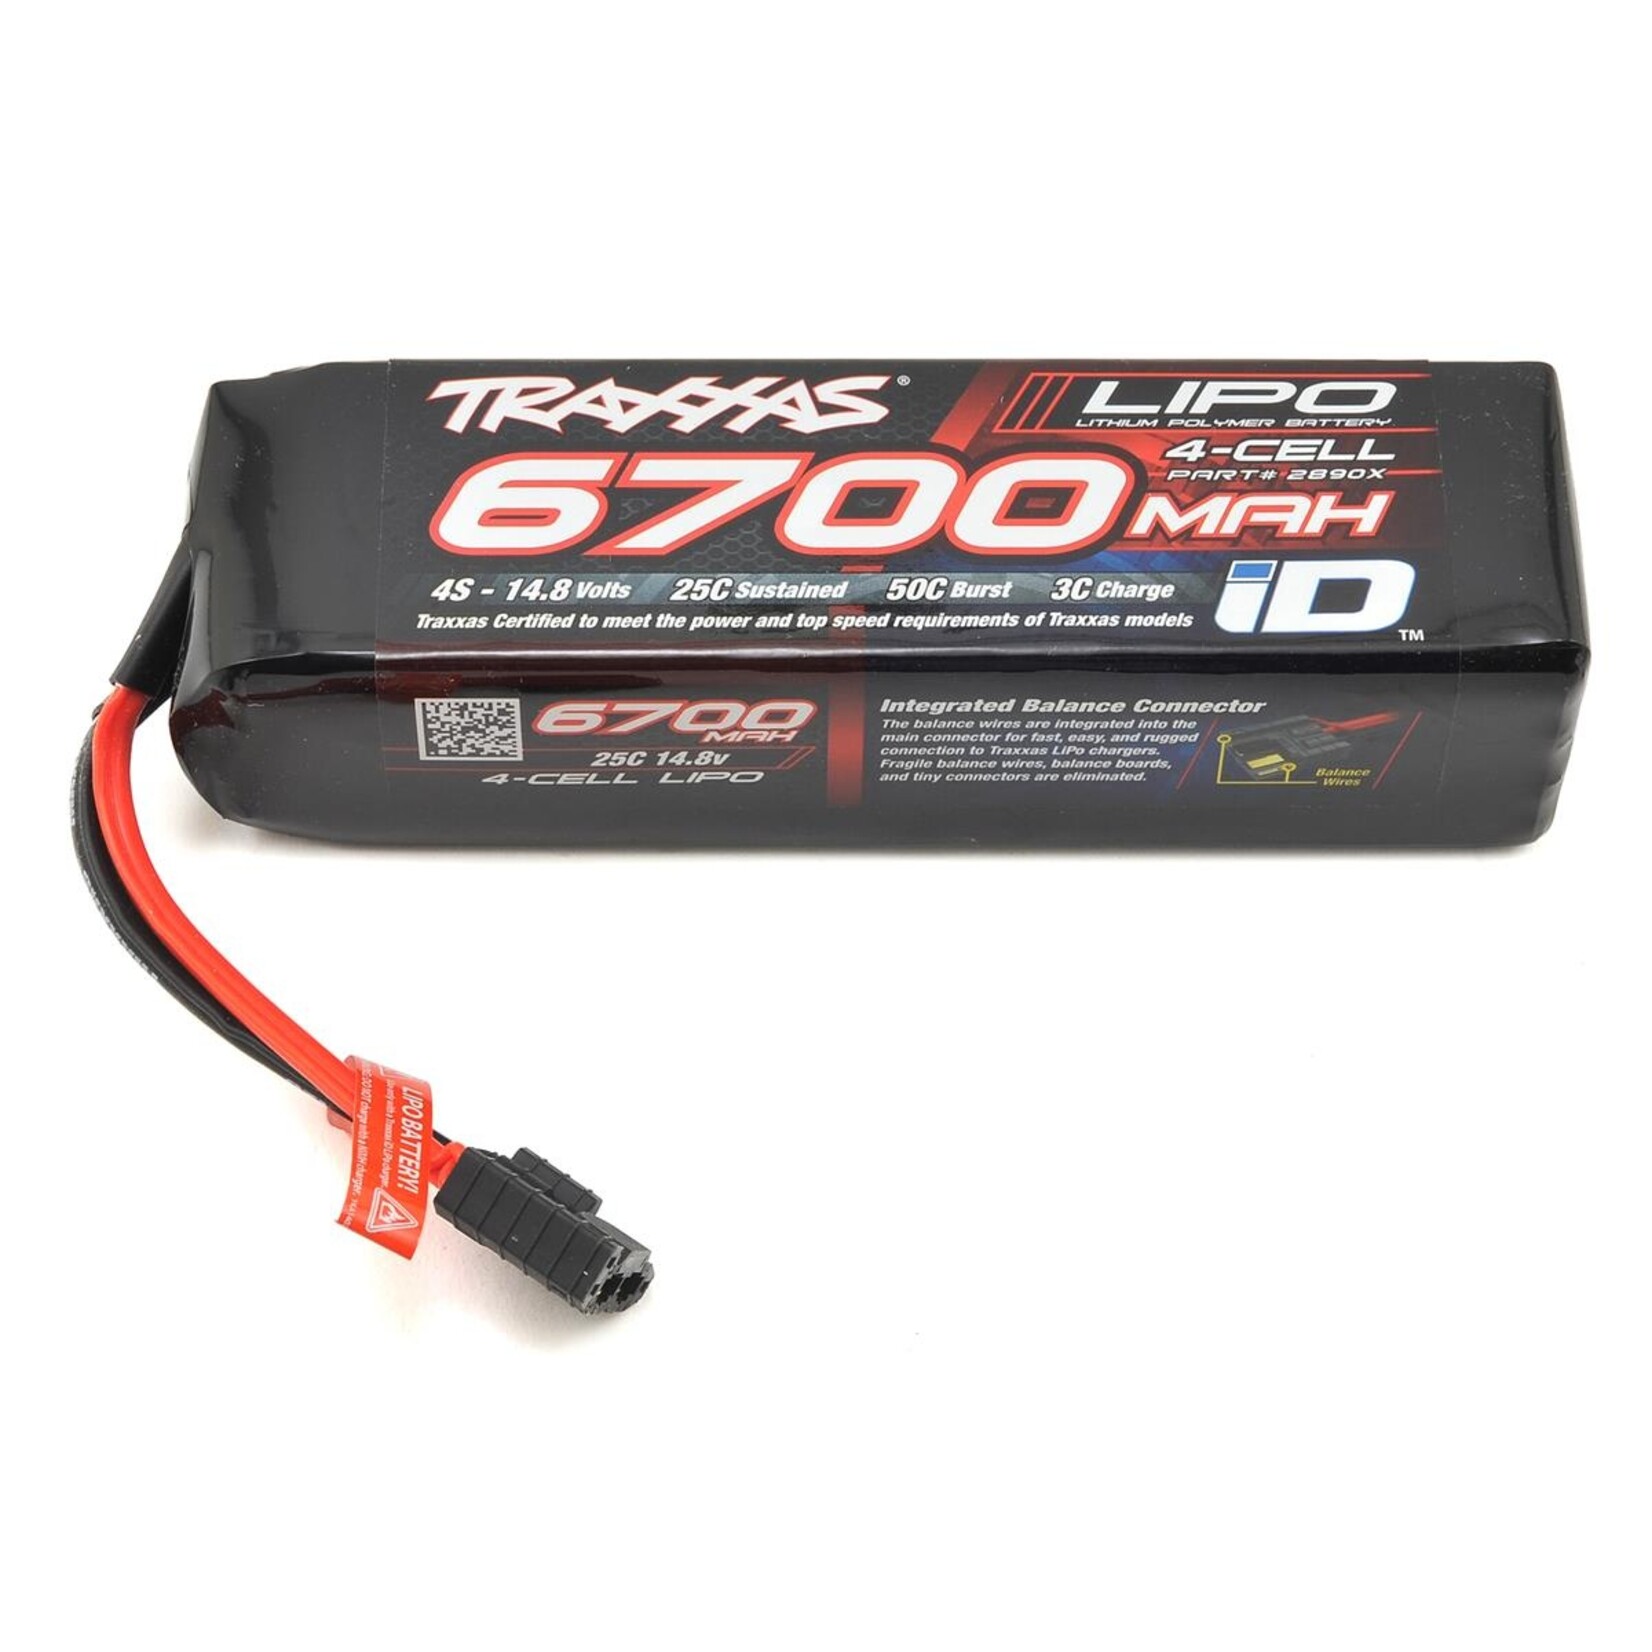 Traxxas Traxxas EZ-Peak Live 4S "Completer Pack" Multi-Chemistry Battery Charger w/One Power Cell 4S Batteries (6700mAh) #2998